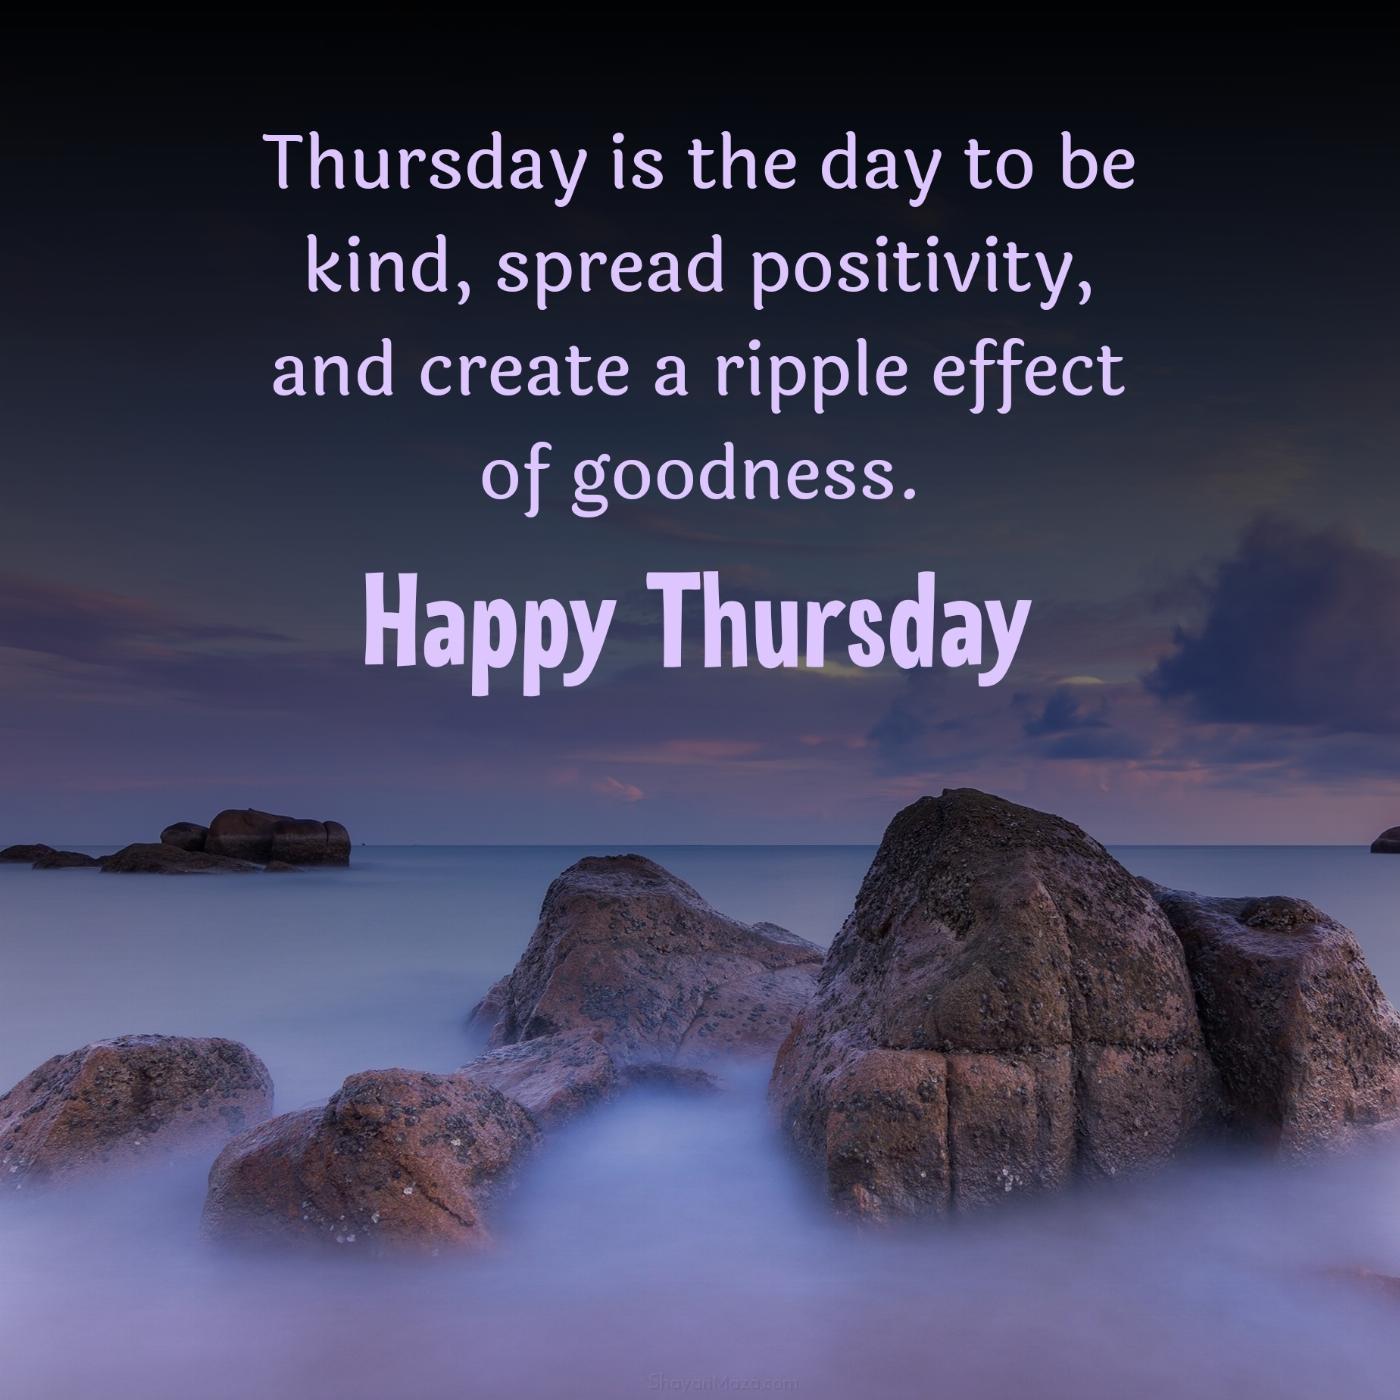 Thursday is the day to be kind spread positivity